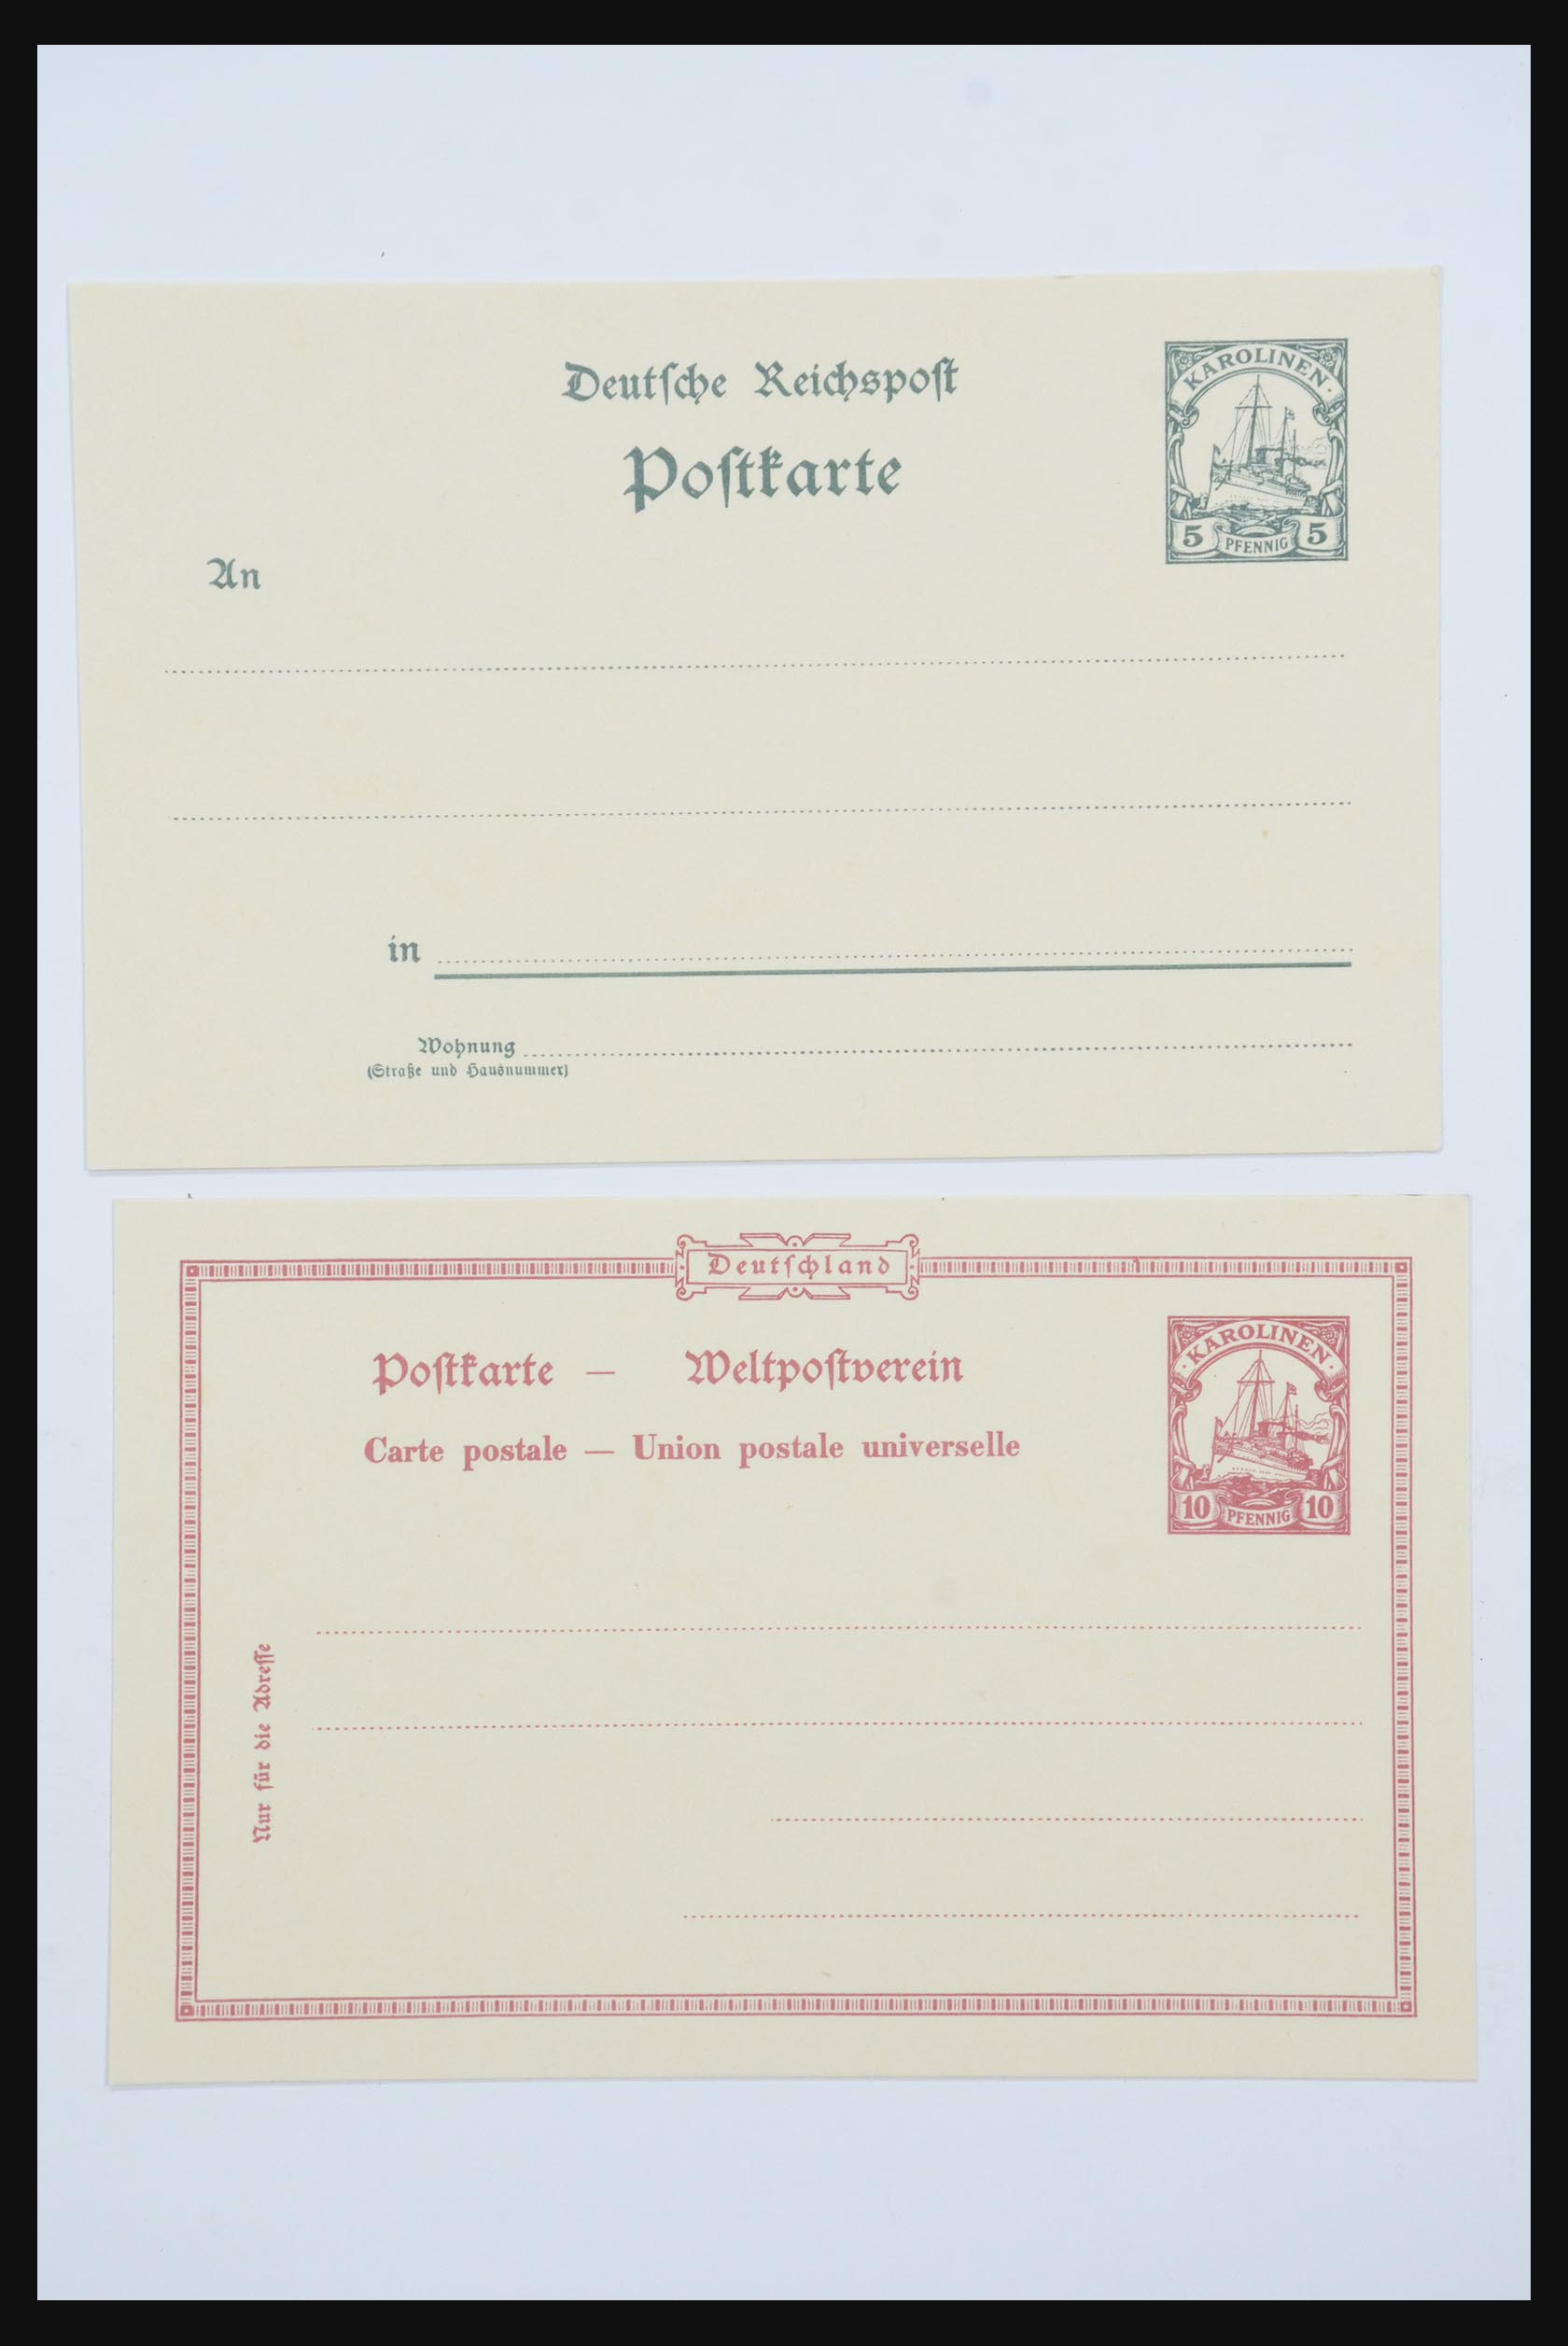 31608 603 - 31608 Germany, territories, States, occupations 1850-1965.